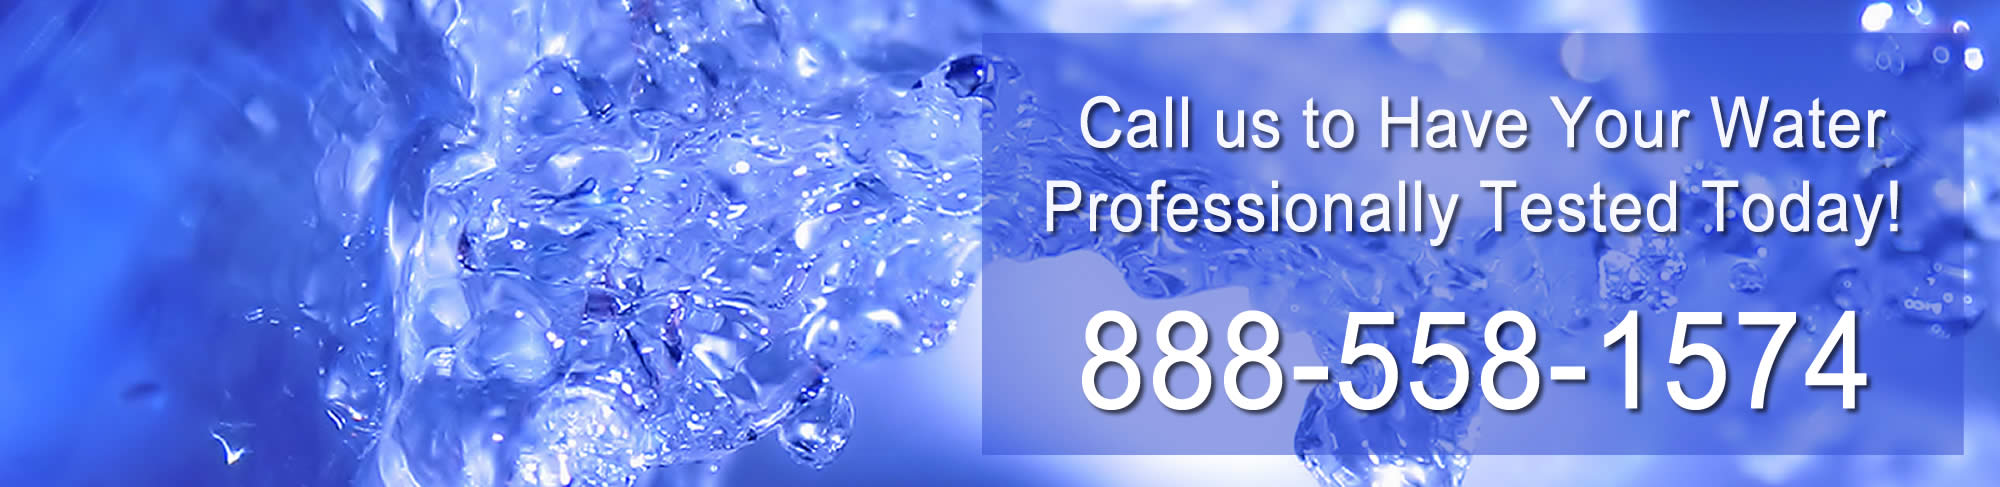 Specializing in Ansonia CT Water Testing and Analysis